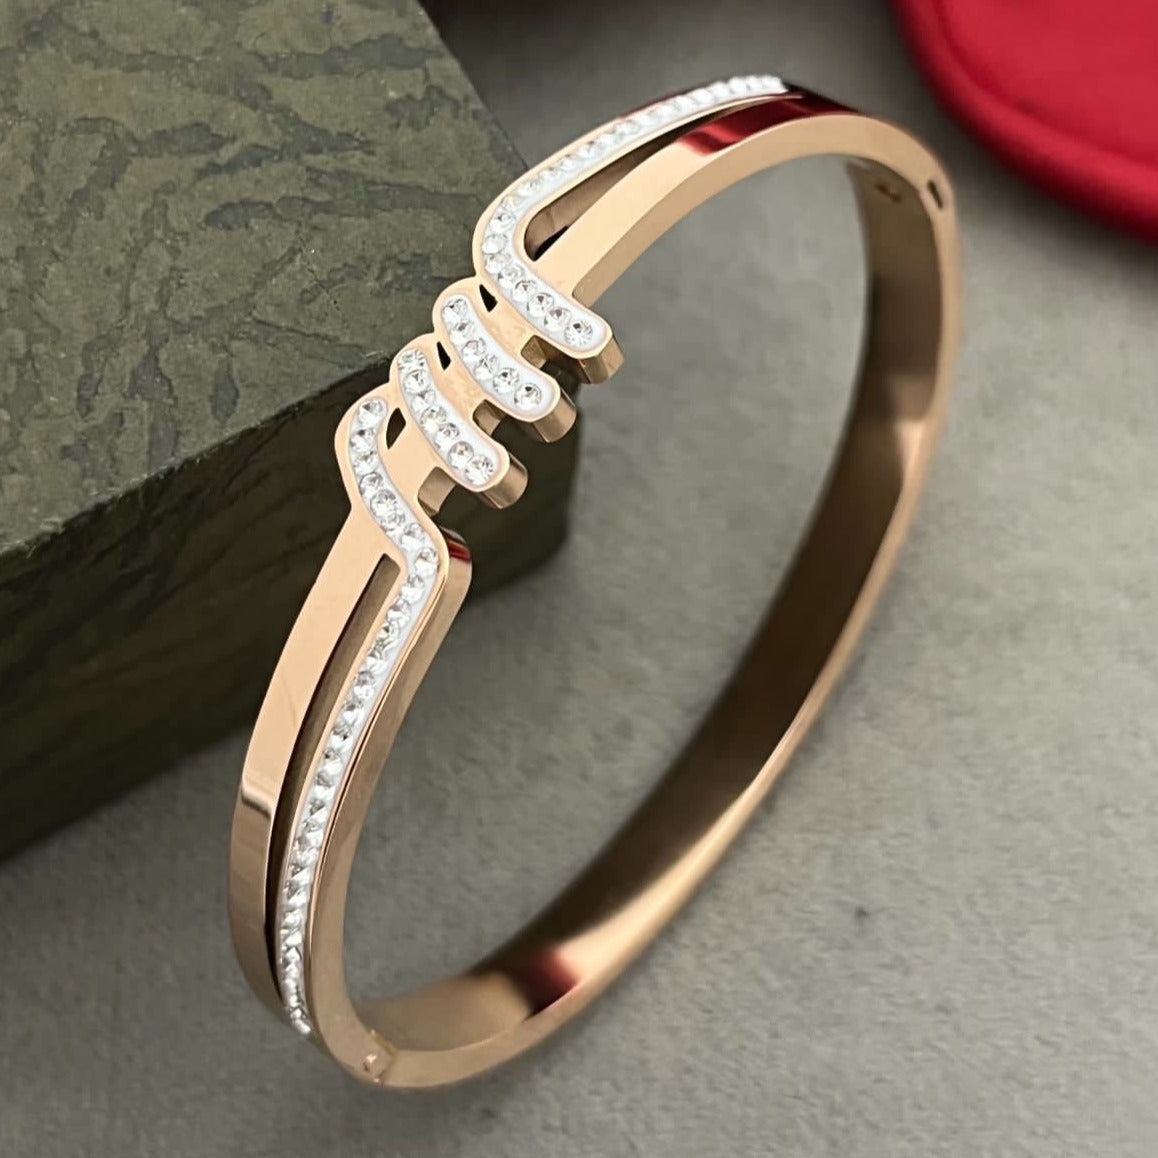 Luxury Stainless Steel Bracelet With Full Diamond Design, Unisex Bangle For  Men And Women Ideal Christmas Gift From Brand_jewelry2020, $22.89 |  DHgate.Com